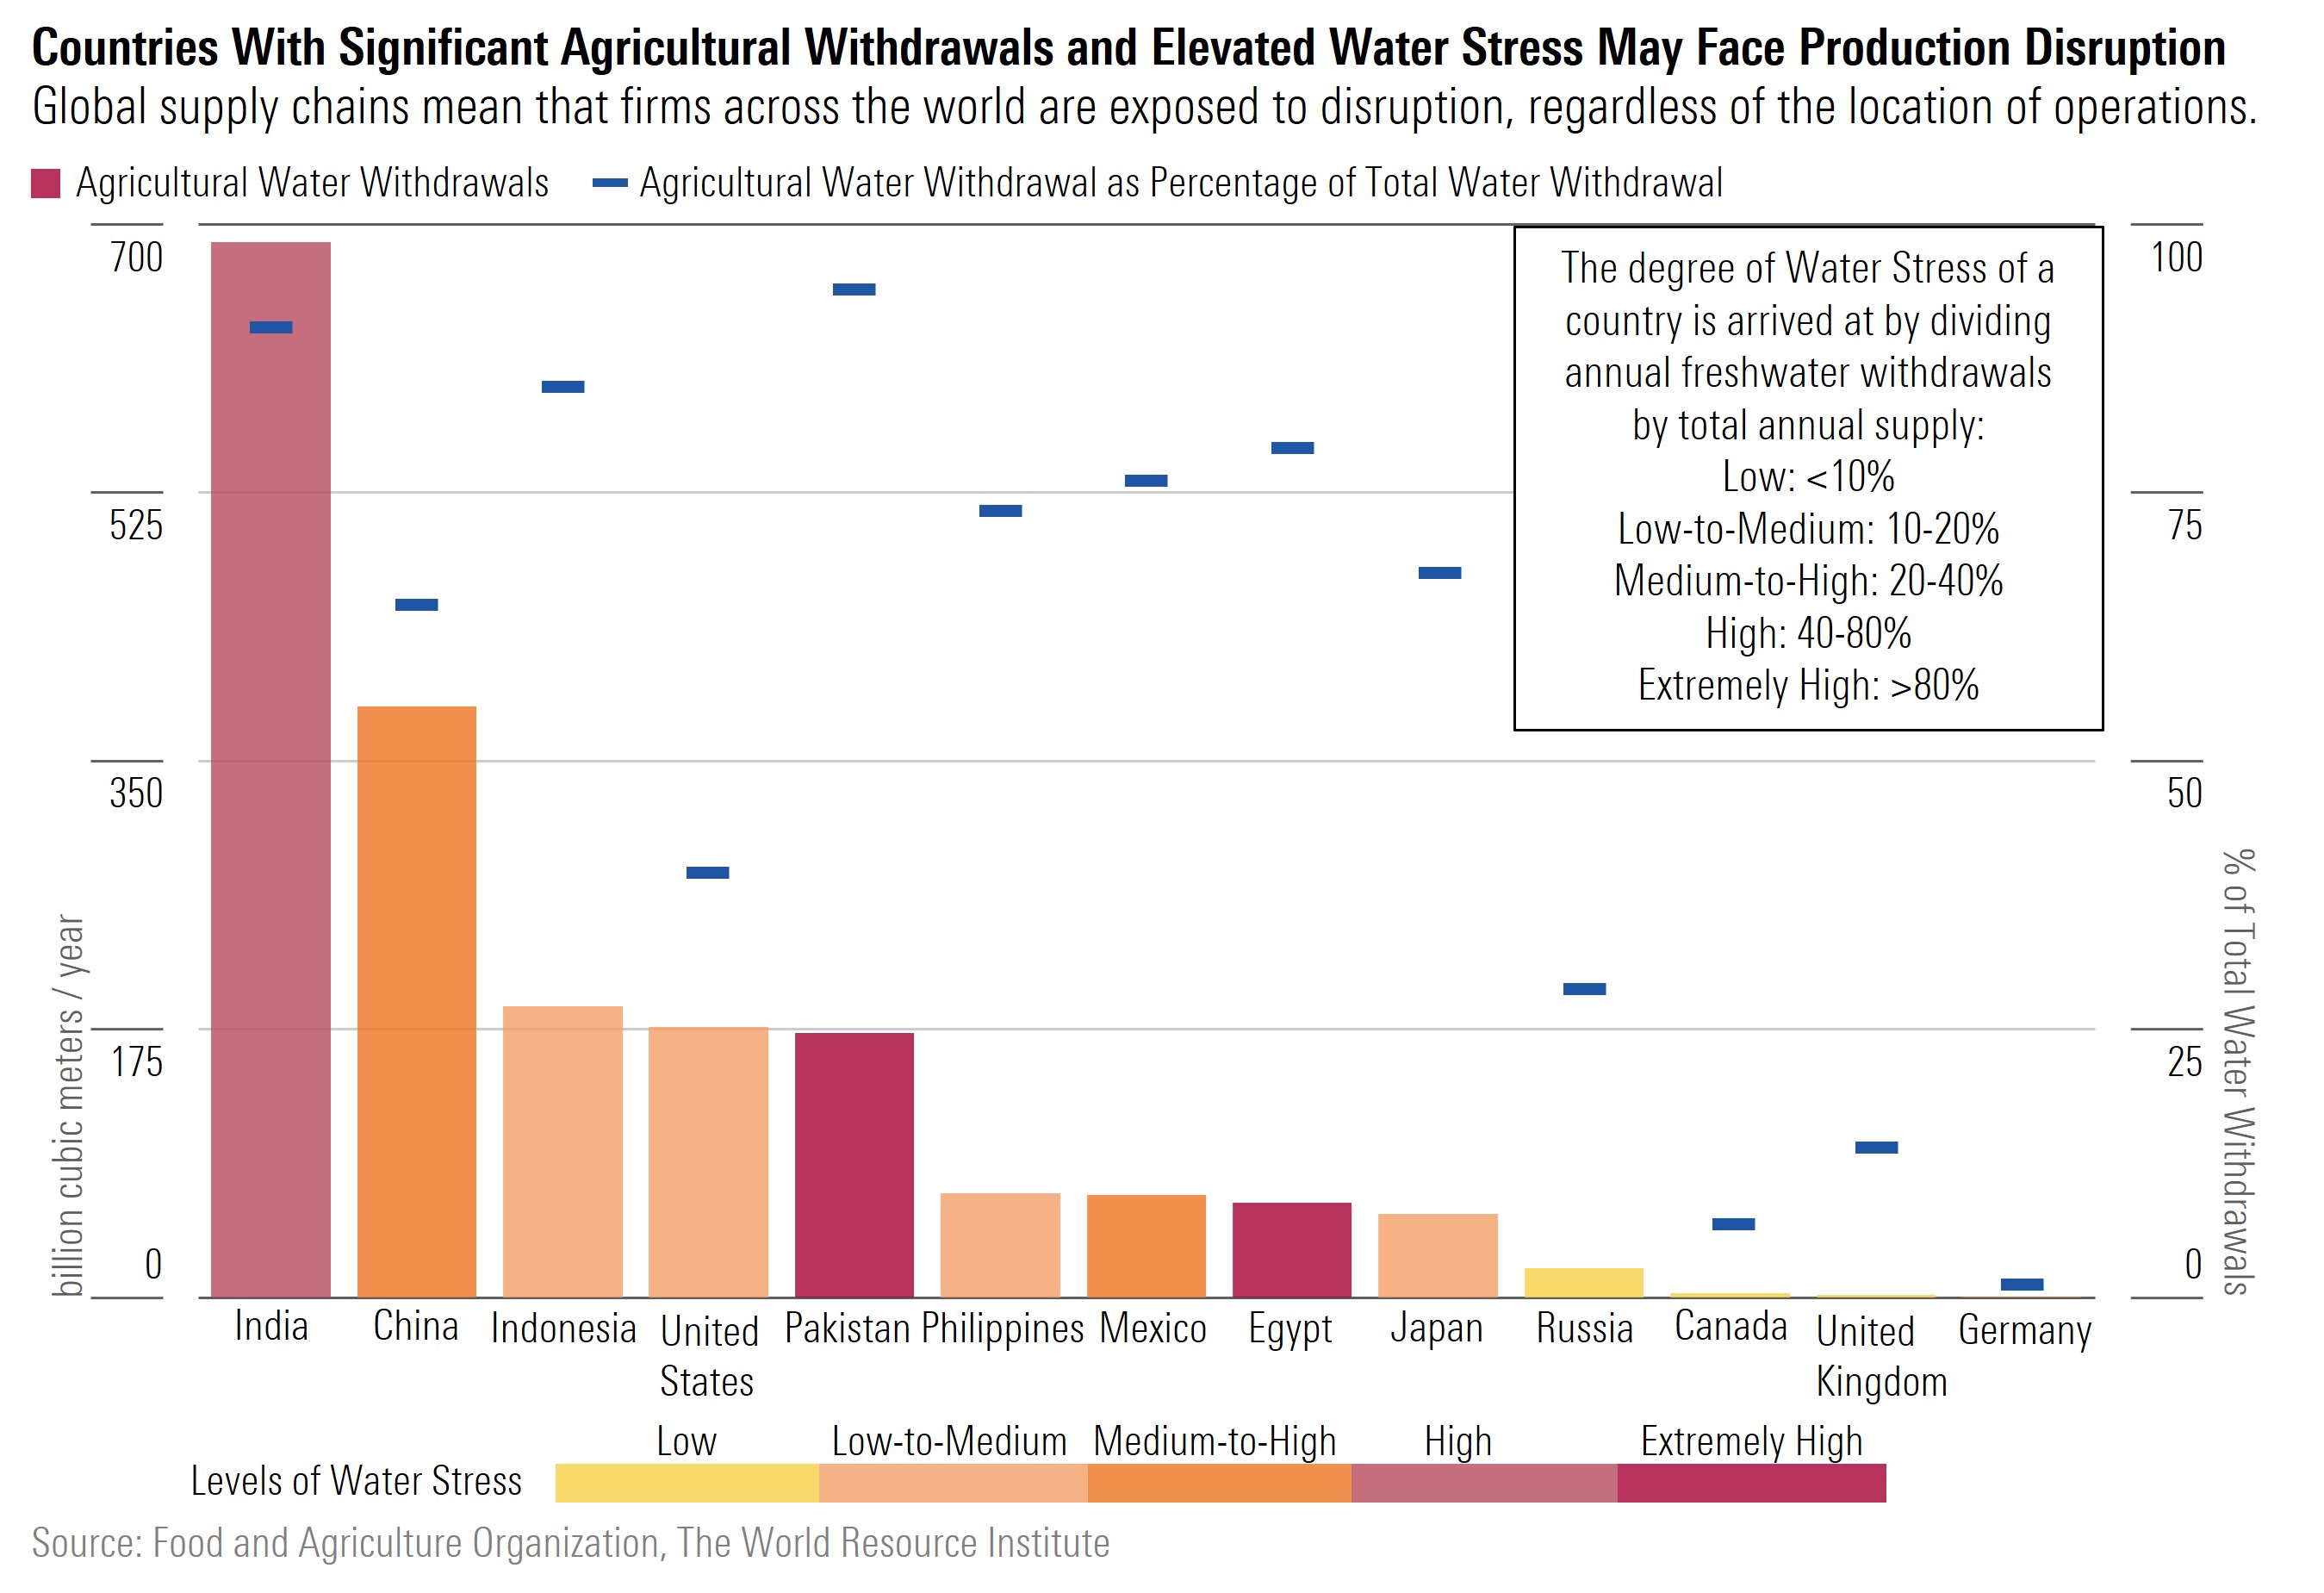 Some key agricultural countries such as India and Pakistan face elevated water stress and significant agricultural water withdrawals, which may lead to food production disruptions.